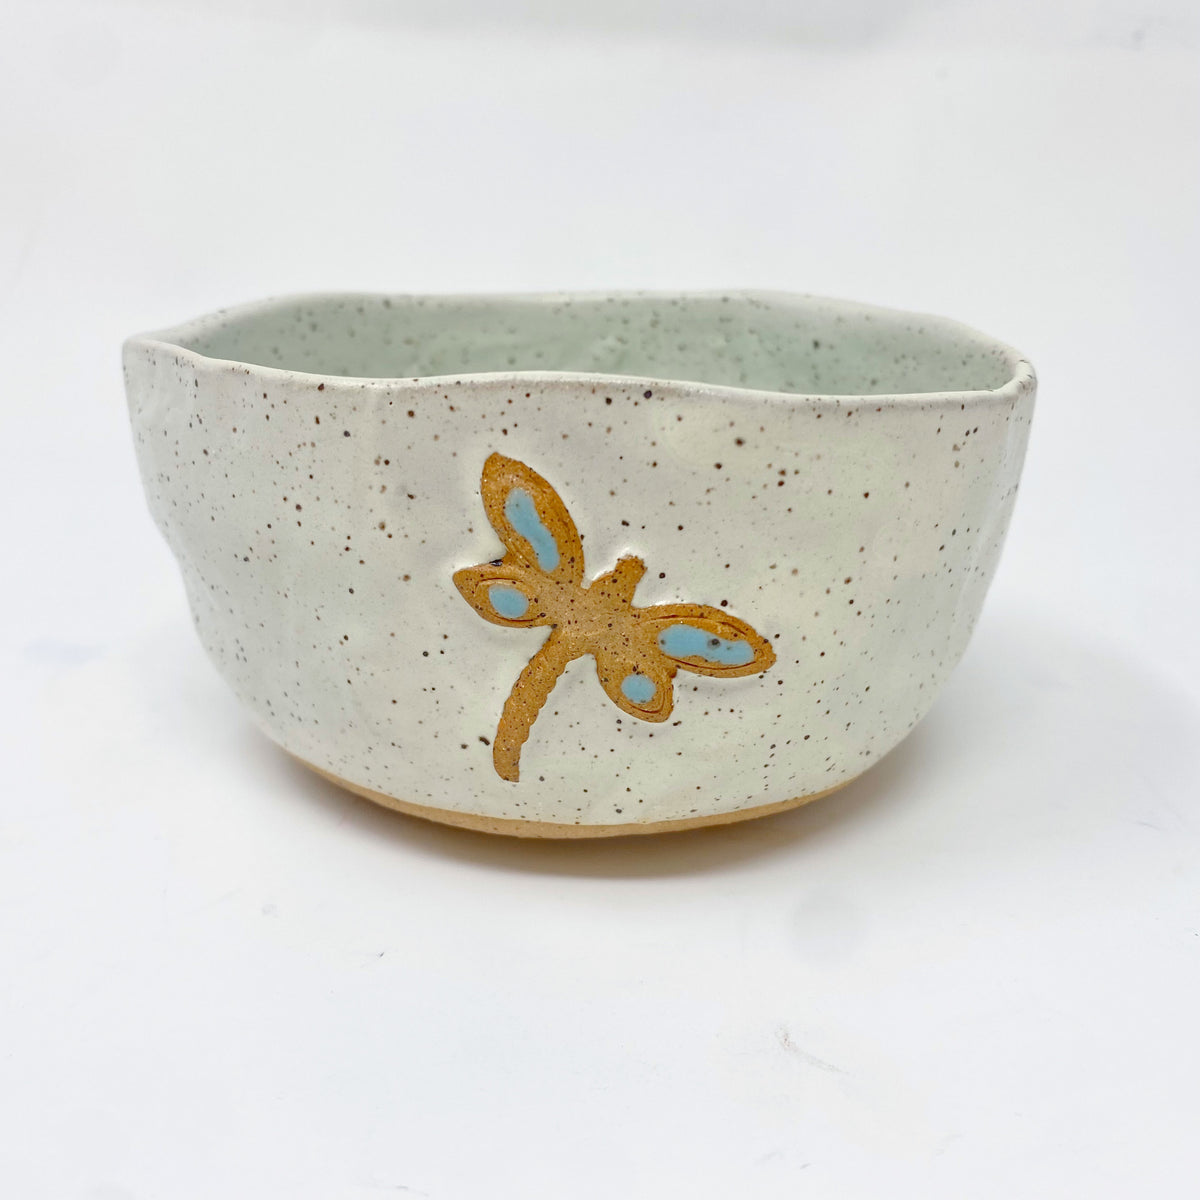 SMALL DRAGONFLY CANDLE - Pot-Pourri